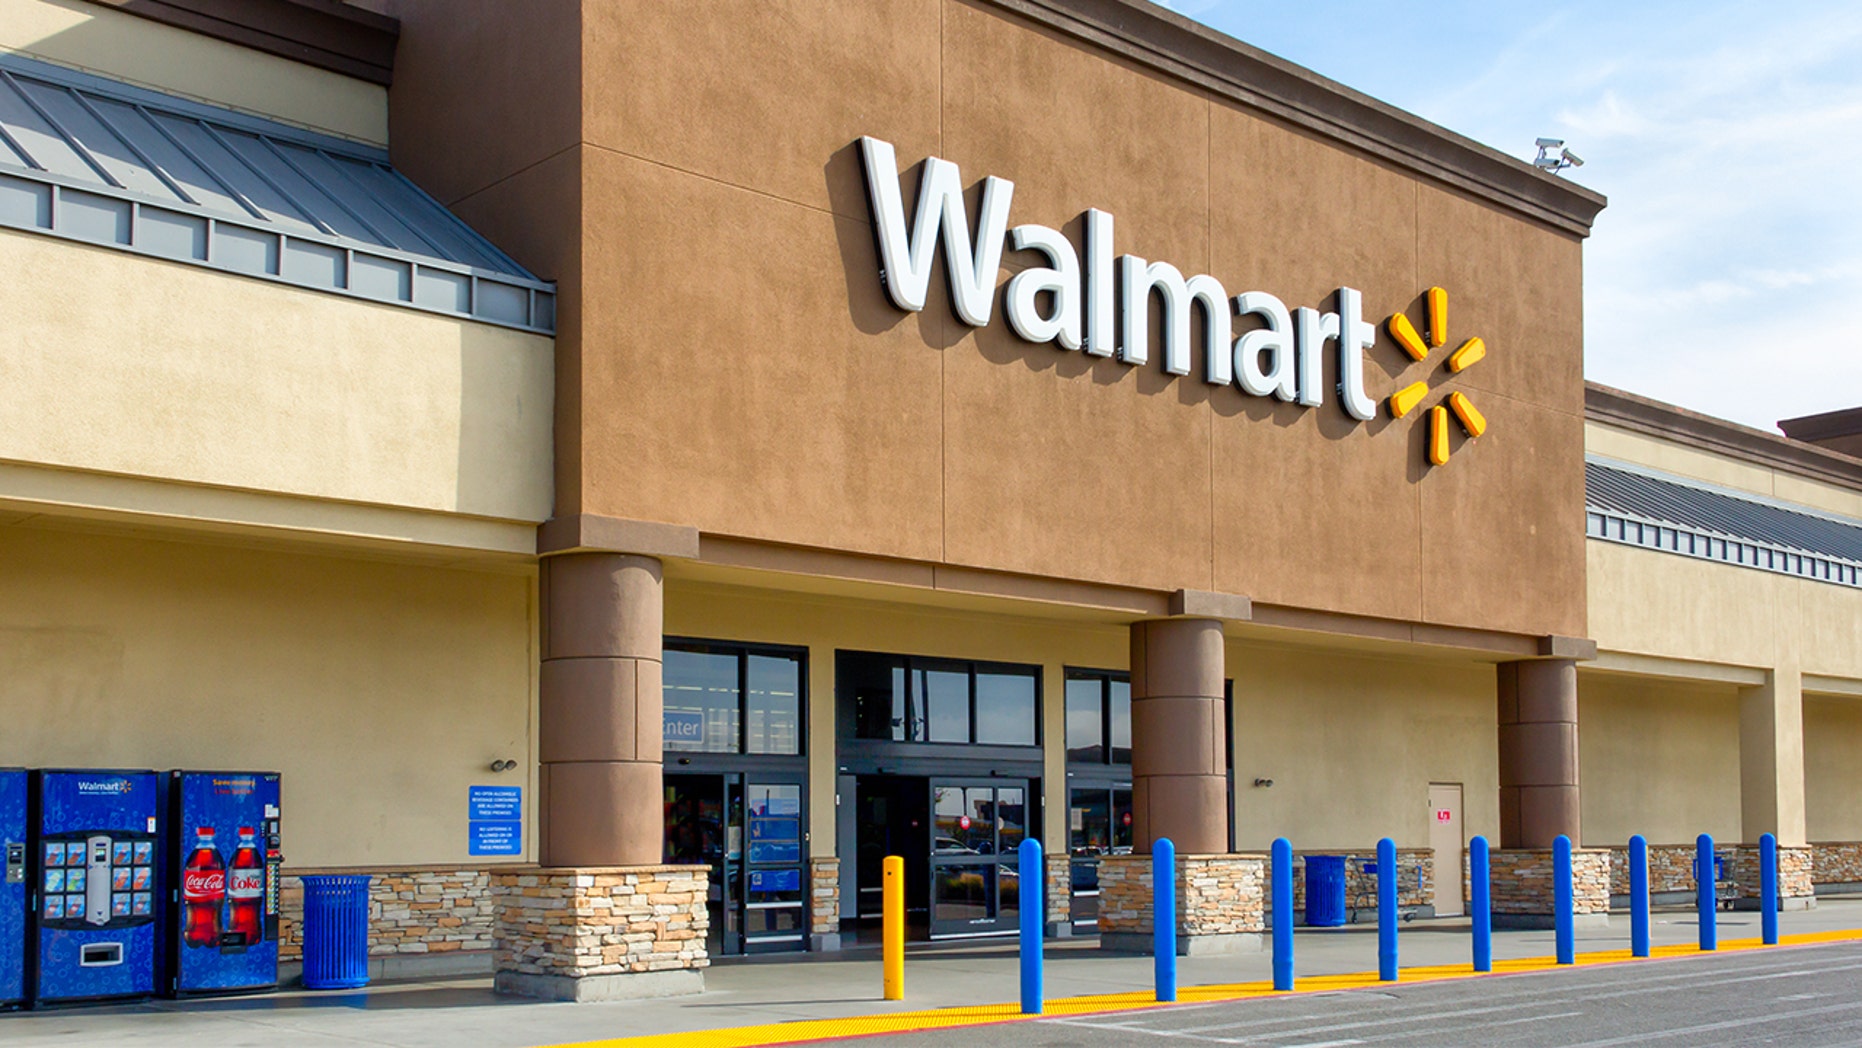 A mysterious man who called himself Santa Claus paid the bills of all employees at a Walmart in Vermont.